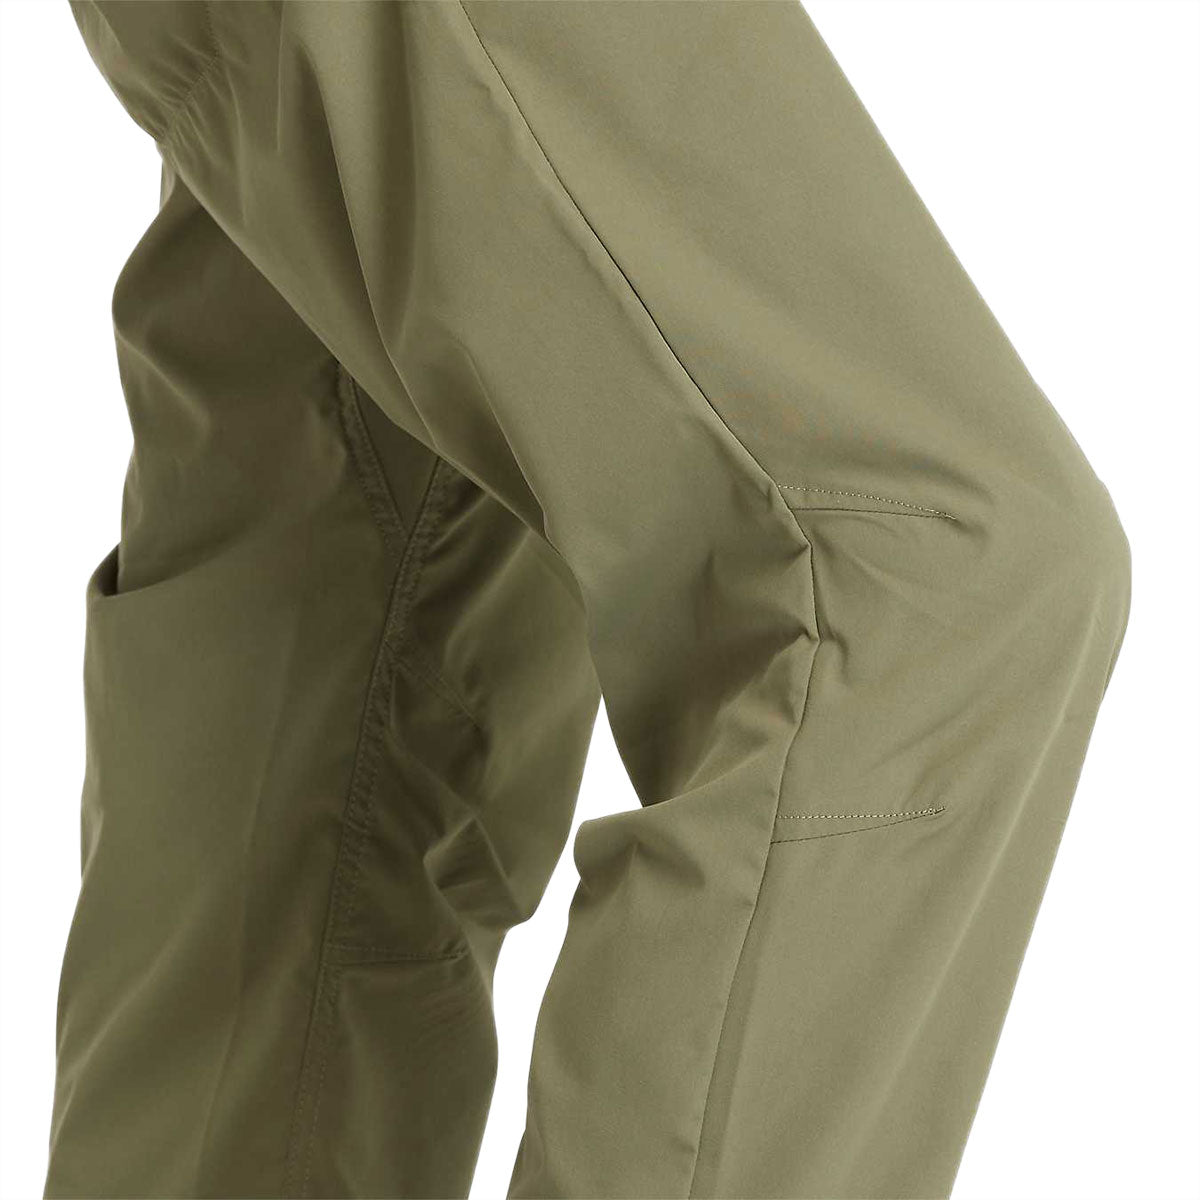 Timberland Dwr Jogger  Pants - Cassel Earth image 4